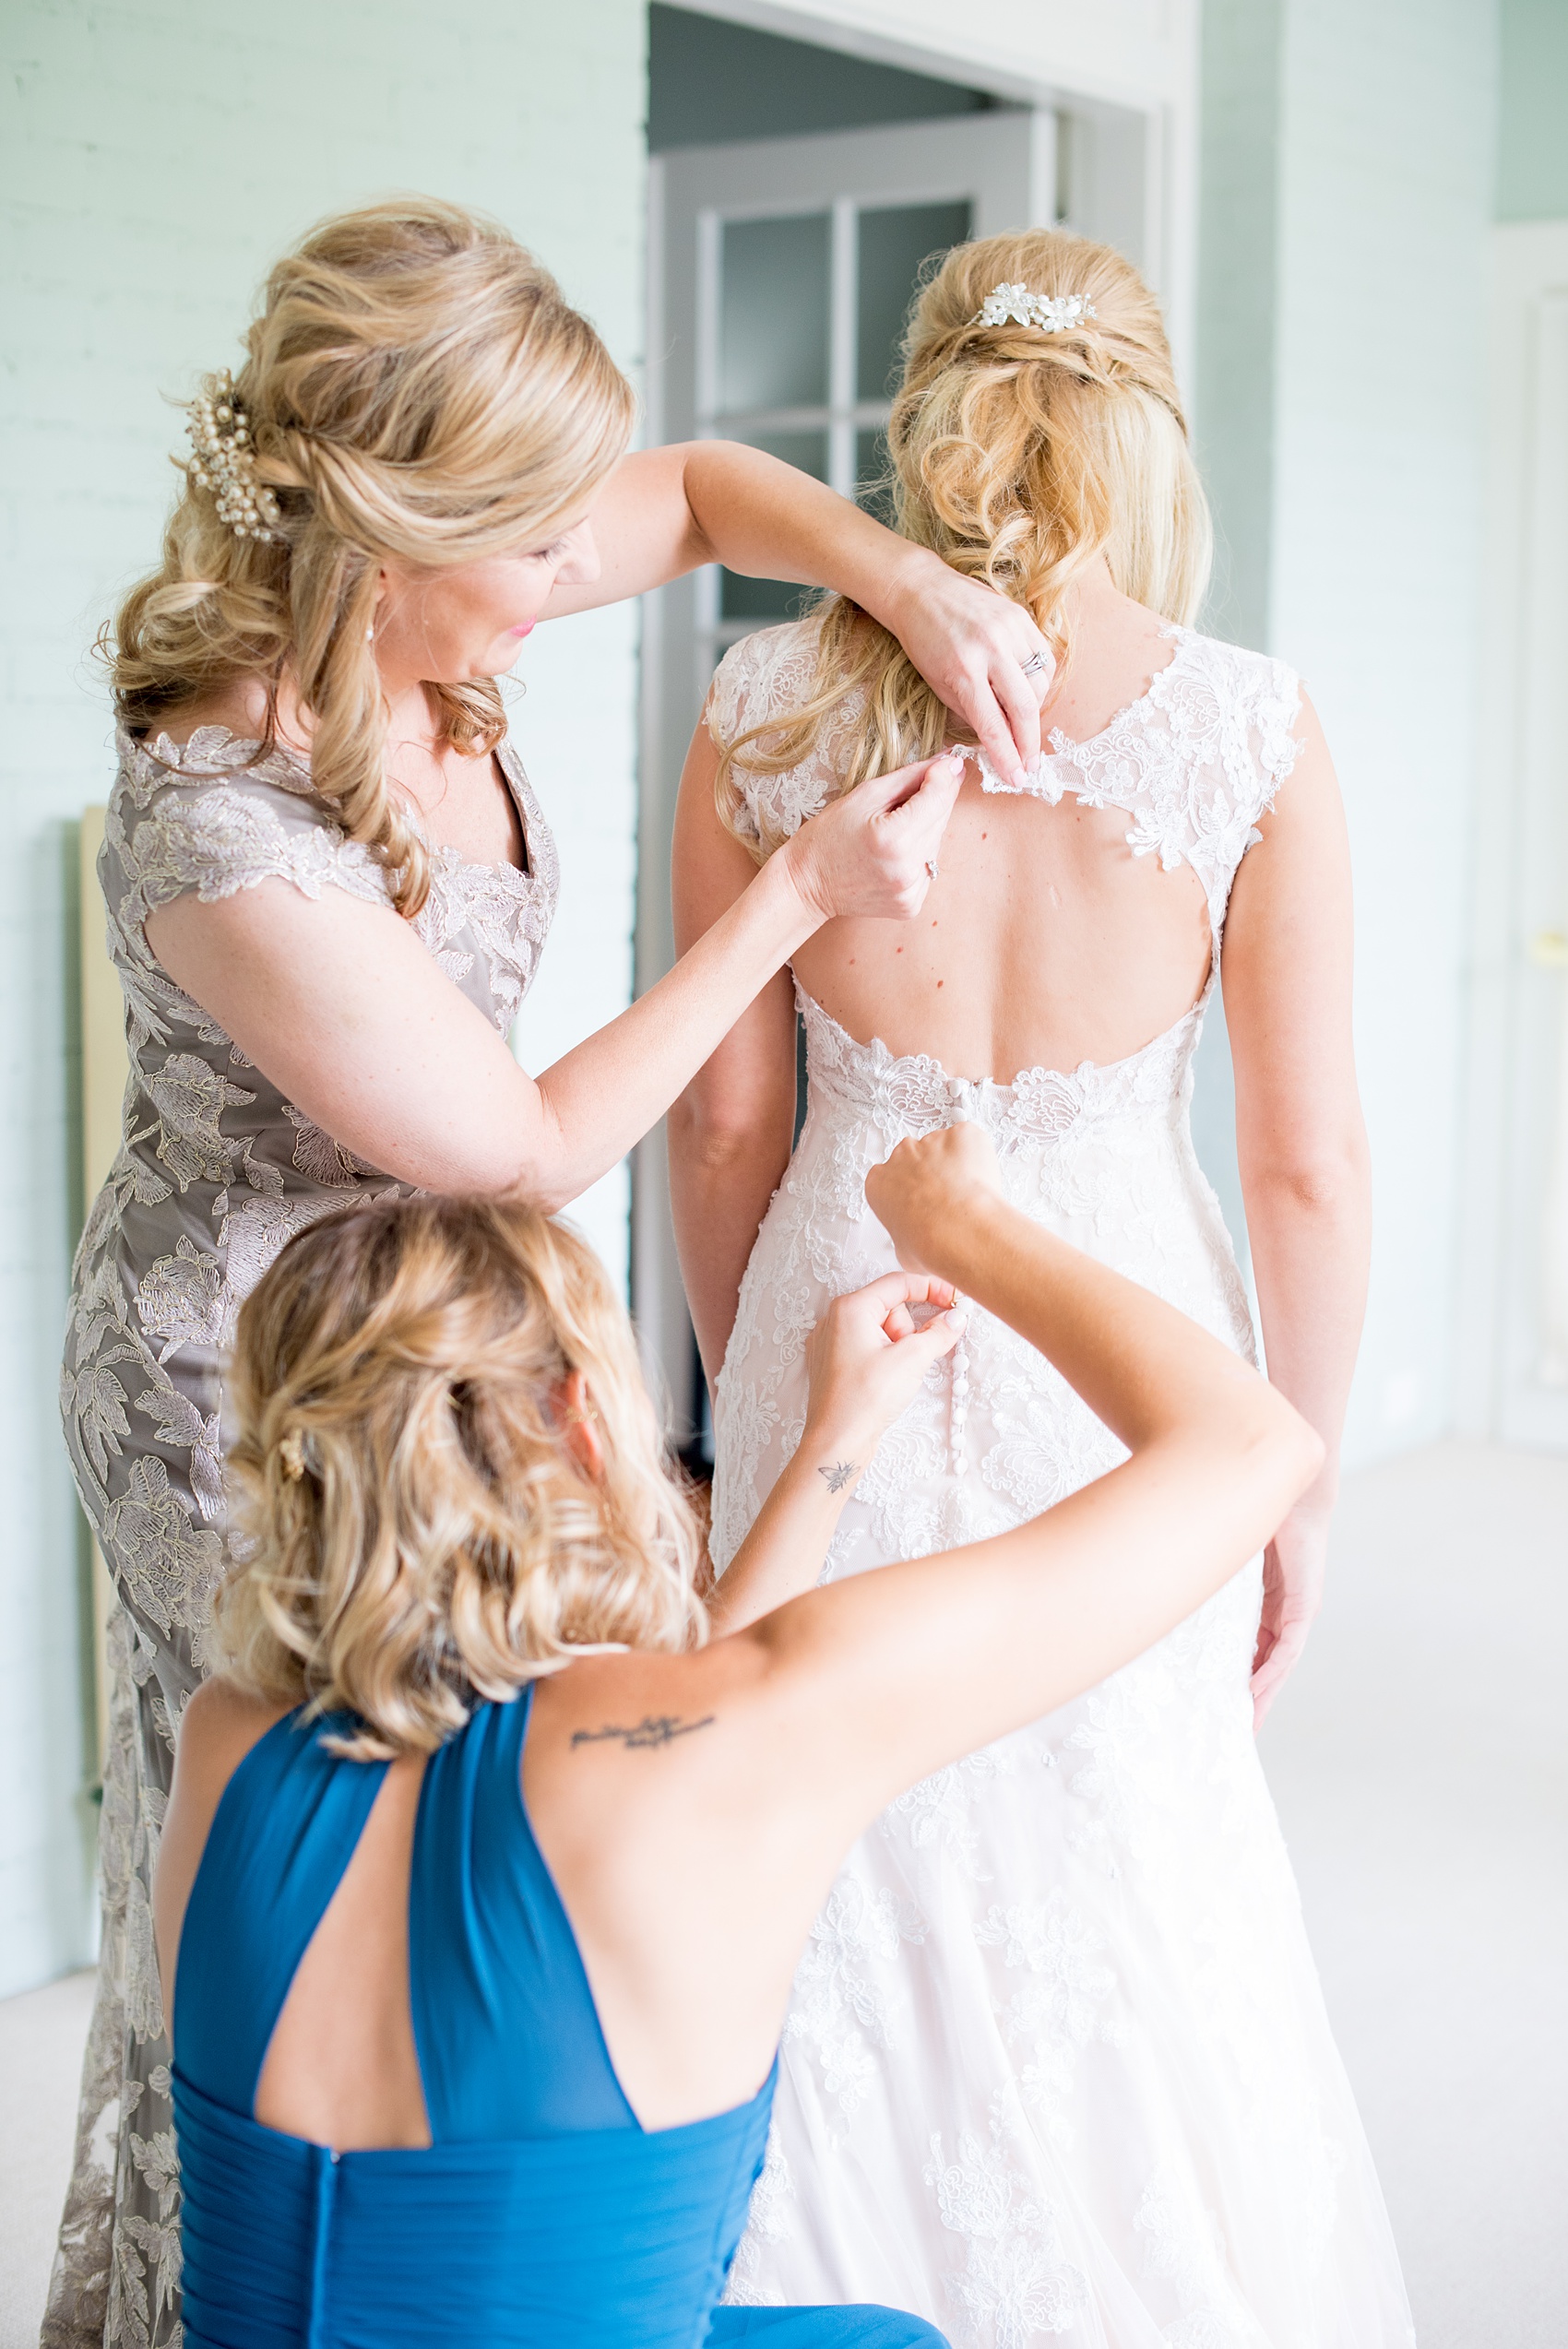 Mikkel Paige Photography photos from getting ready photos in Durham, North Carolina. Picture of the bride getting ready with her mother and sister, Maid of Honor, in a suite in King's Daughters Inn.